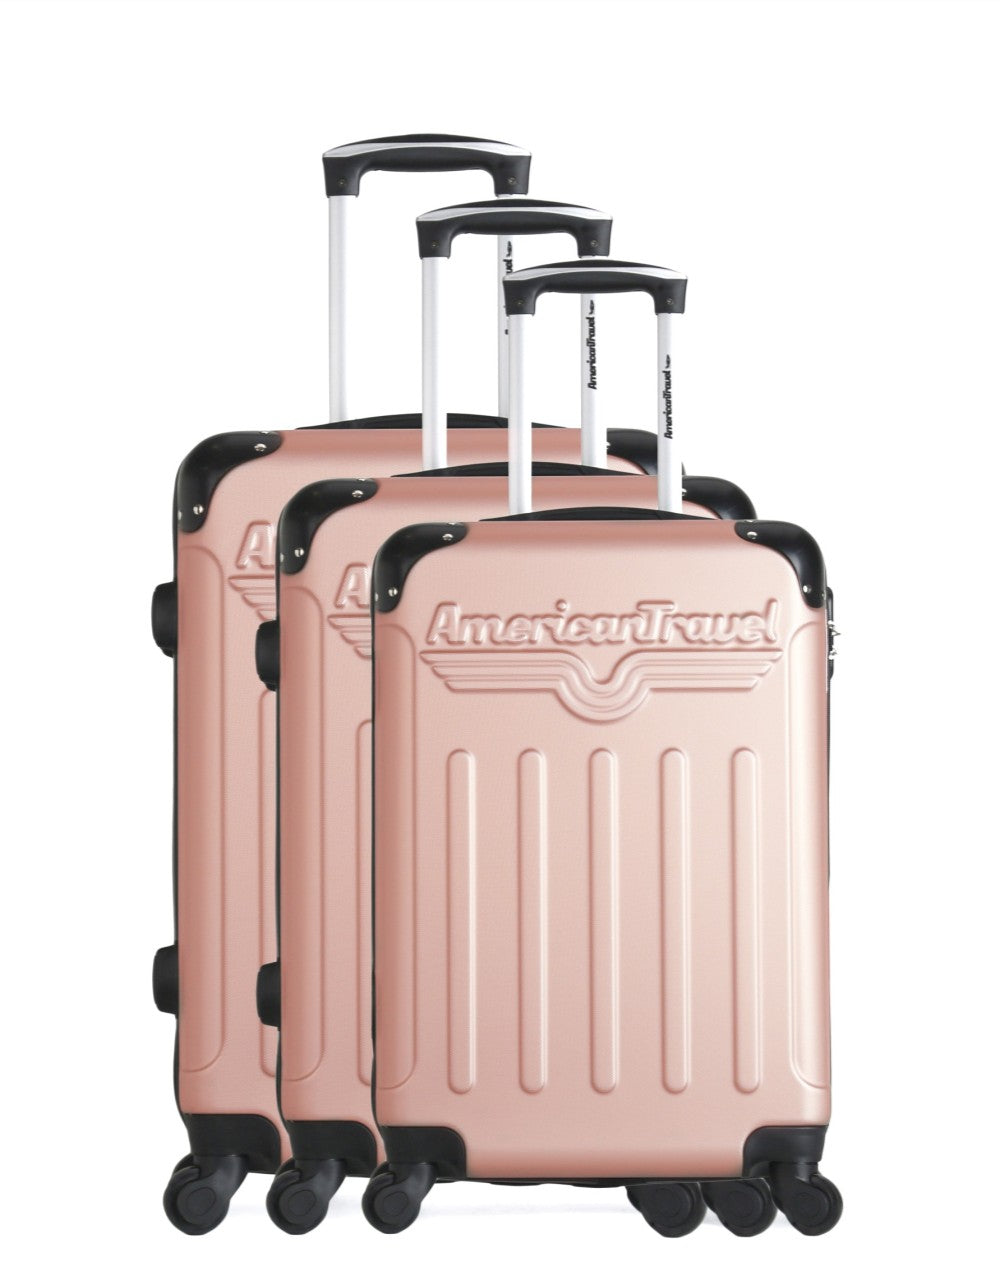 American Travel - Des Bagages au look chic